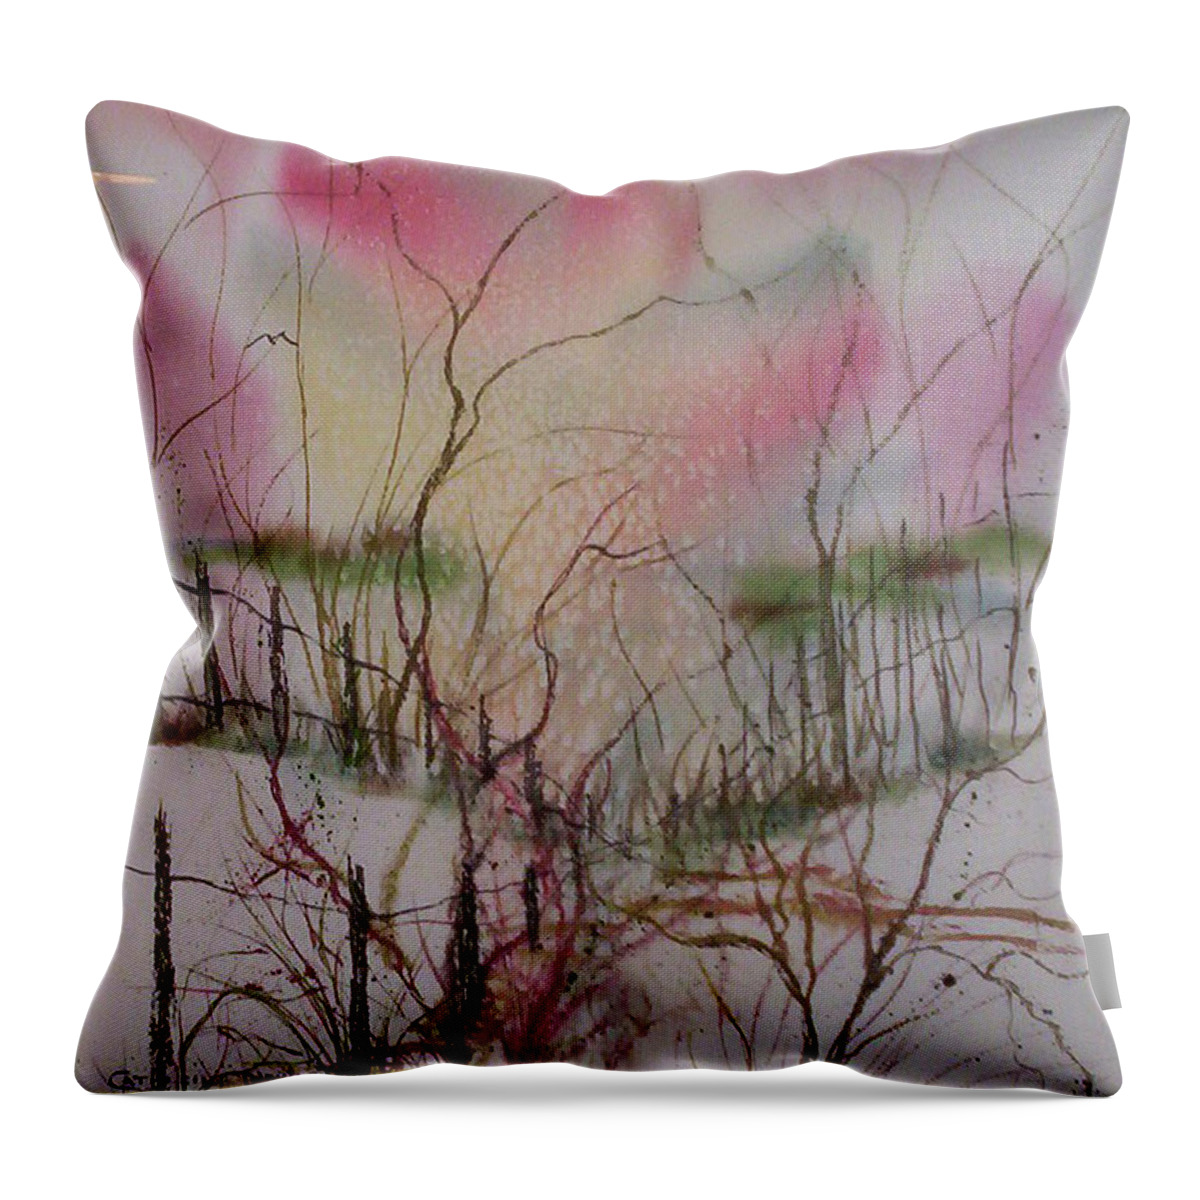 Recovery Throw Pillow featuring the painting Crossing Boundaries by Catherine Ludwig Donleycott